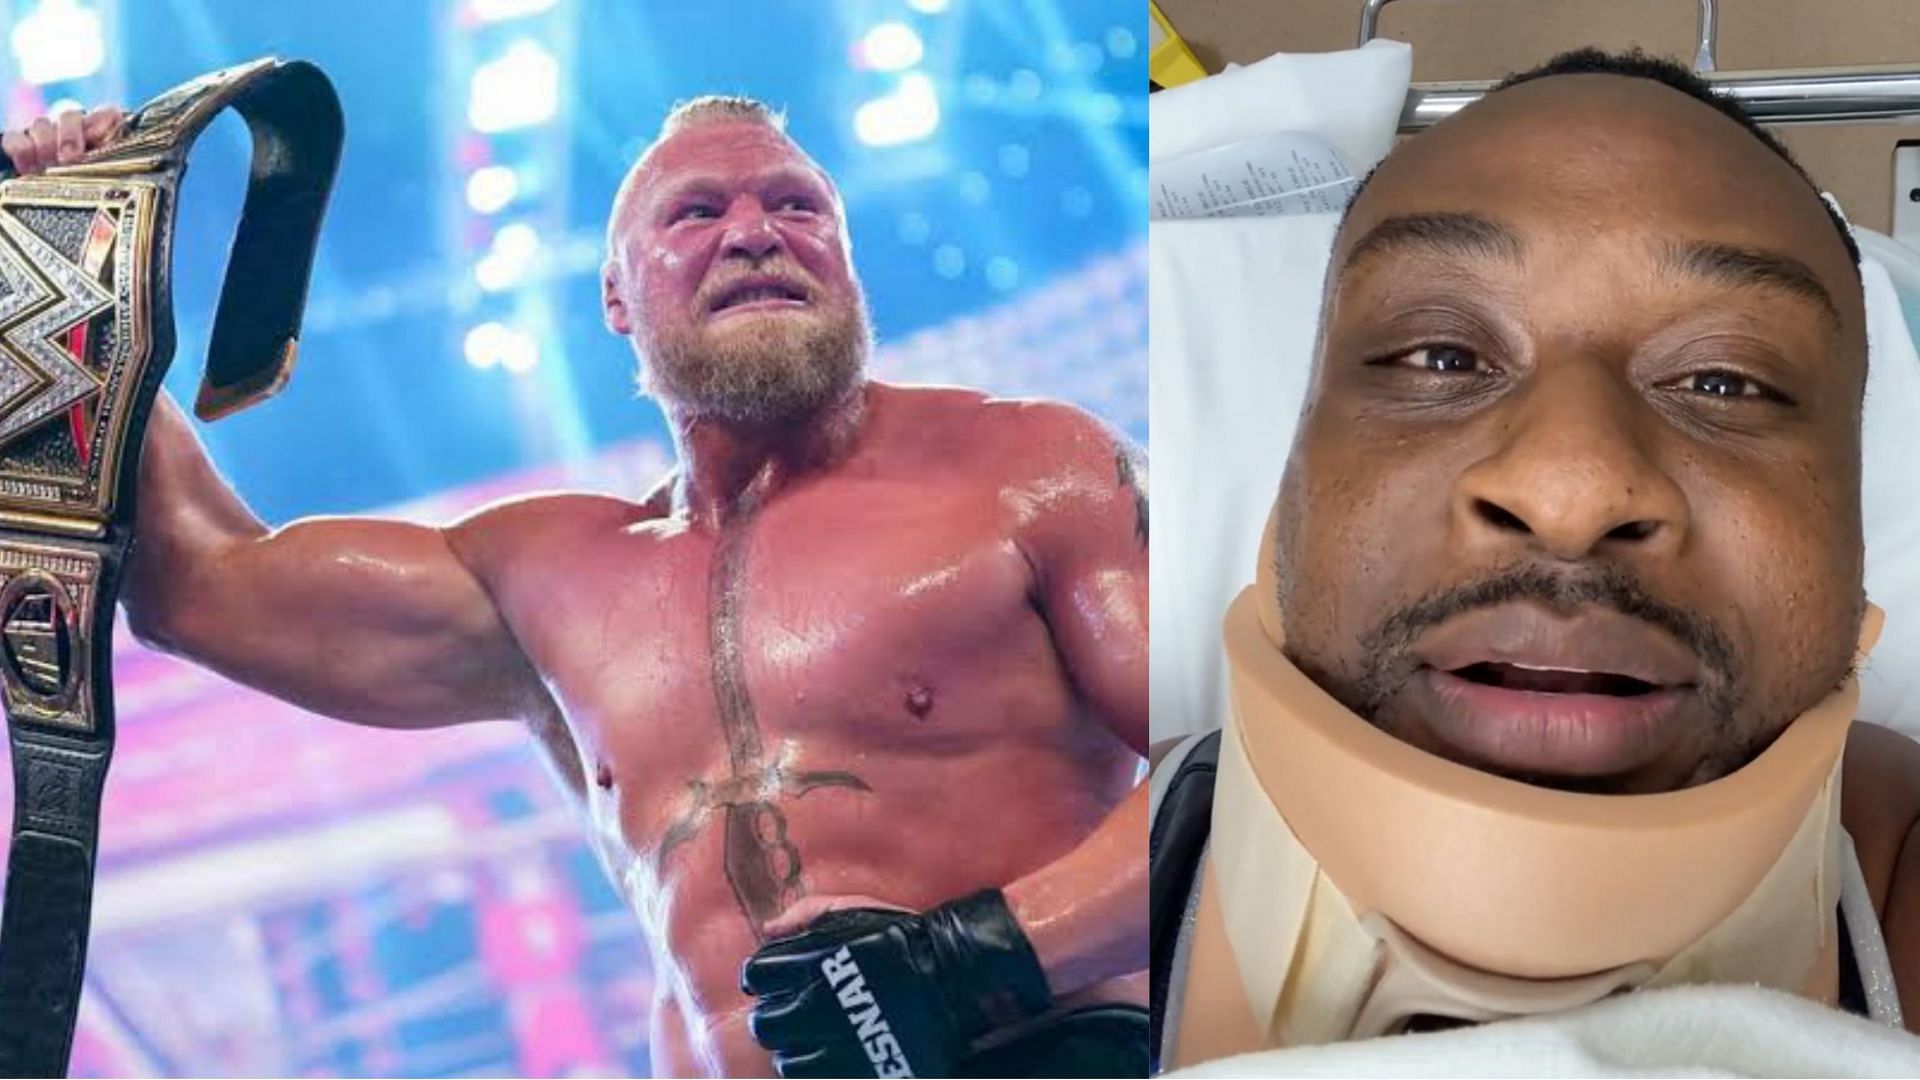 Brock Lesnar will main event WrestleMania 38, while Big E will miss it.